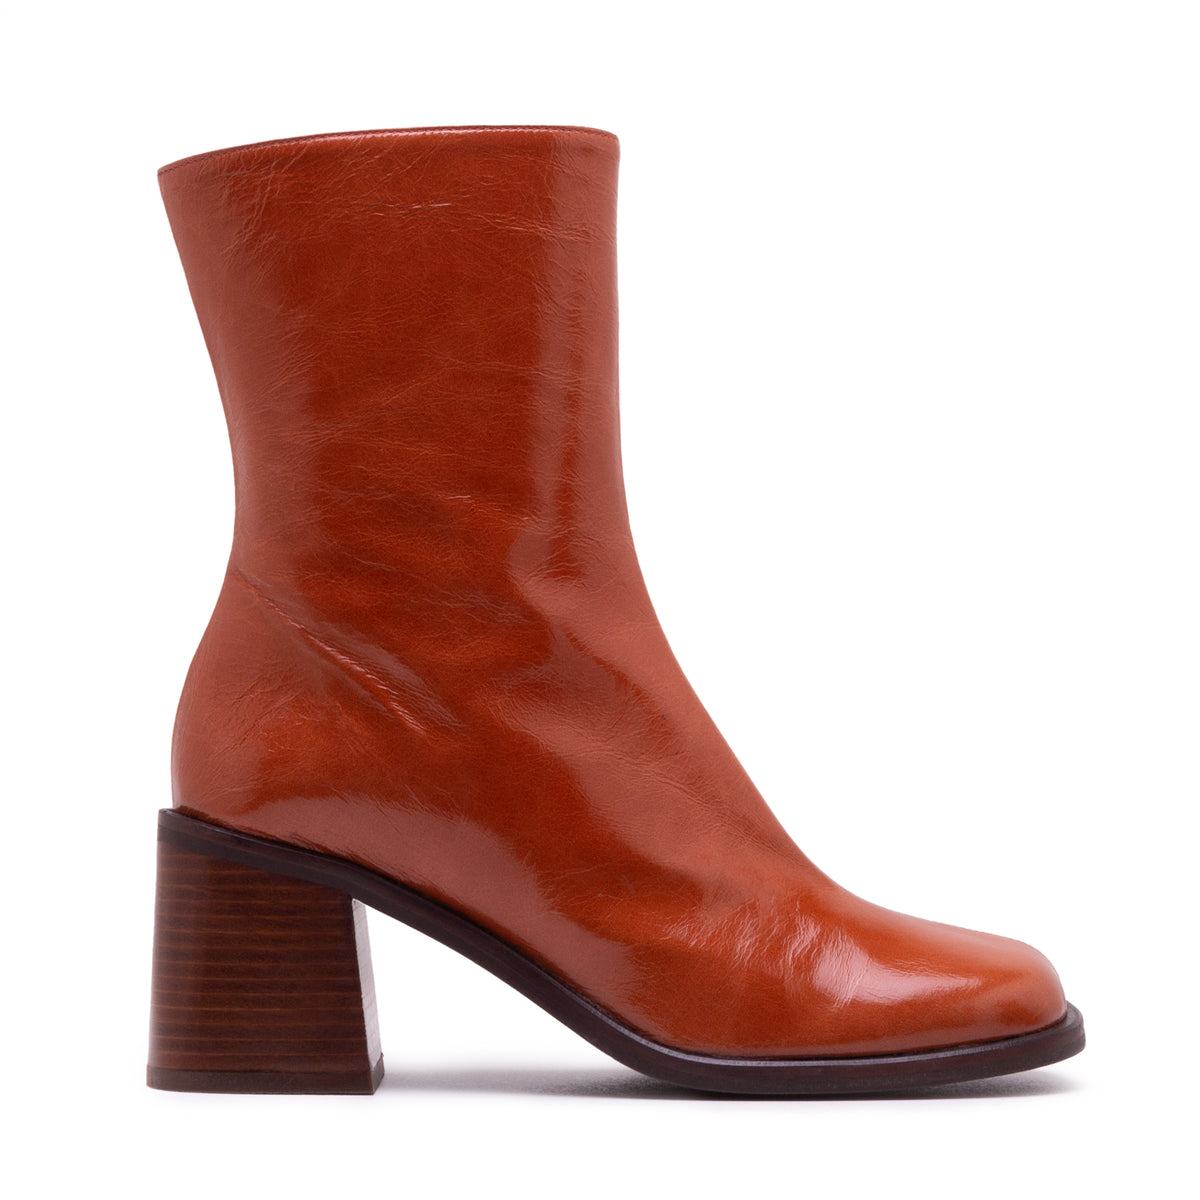 BERNY ANKLE BOOT